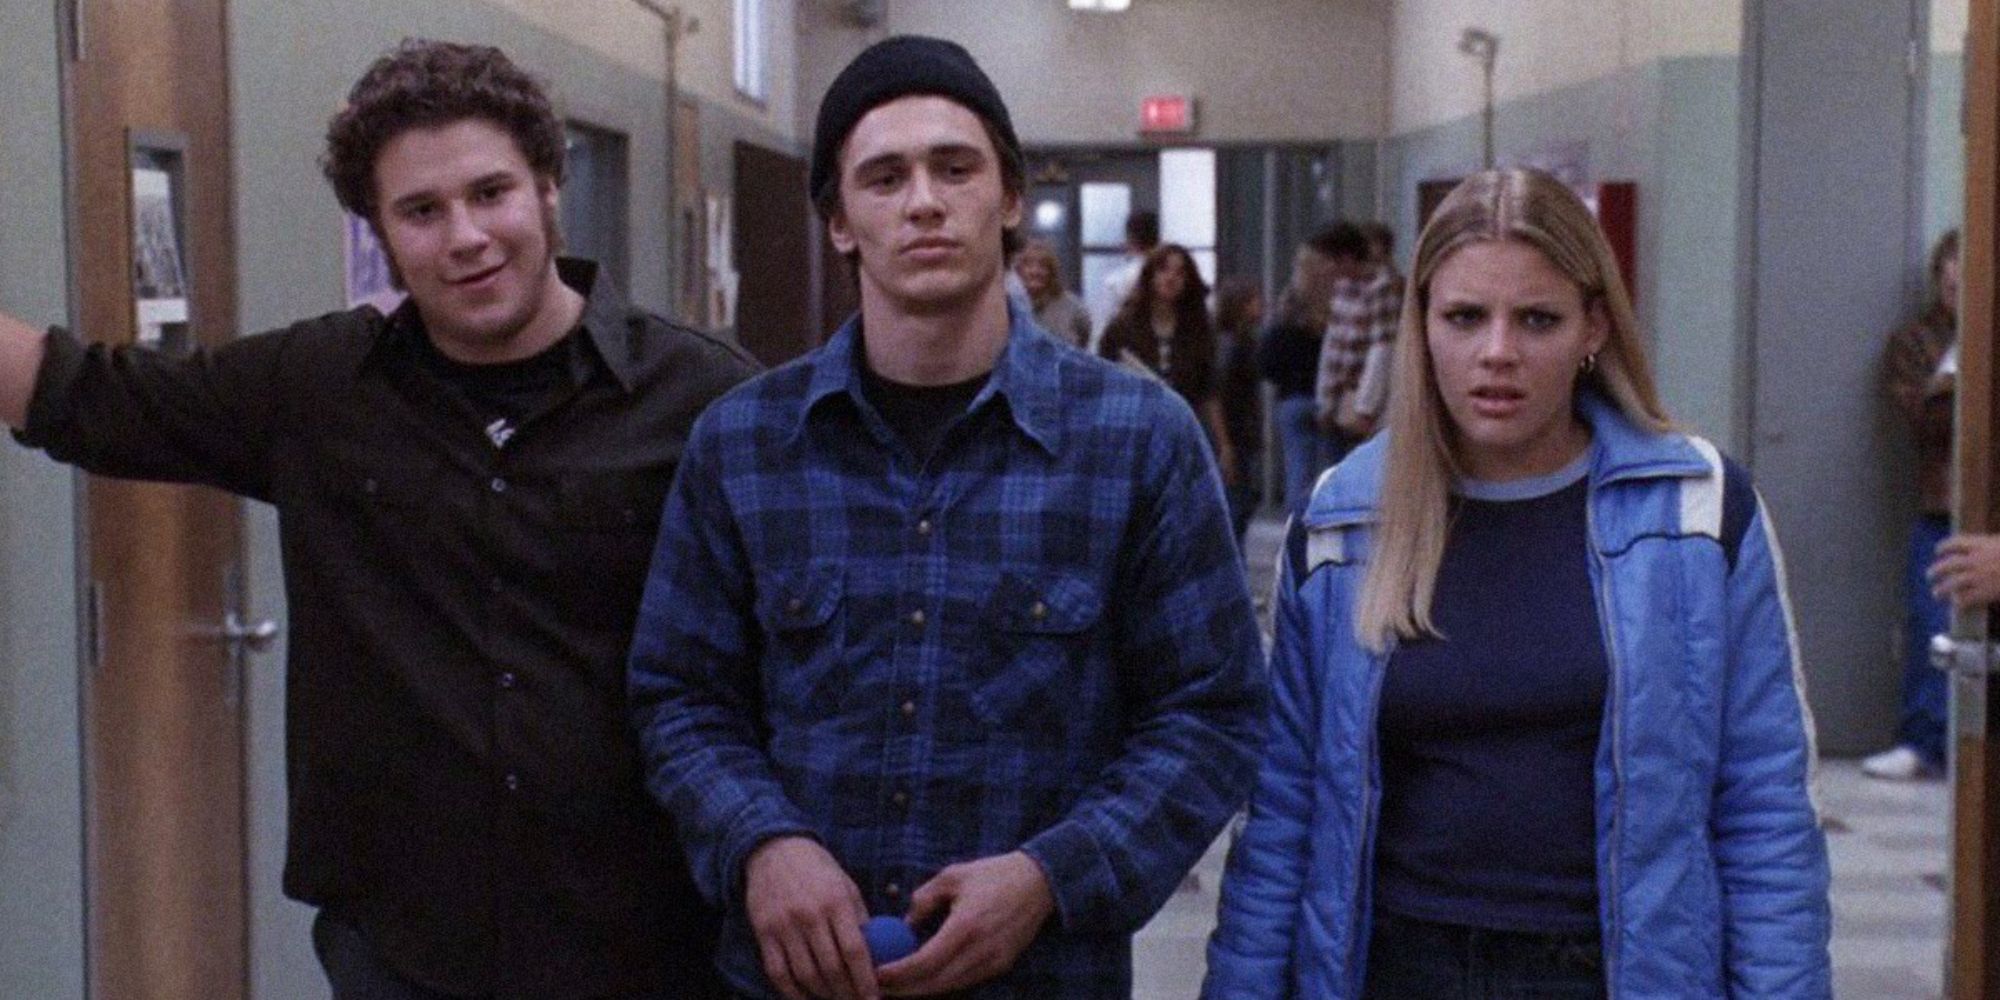 The Freaks and Lindsay from Freaks & Geeks standing together walking down the hallway in school.